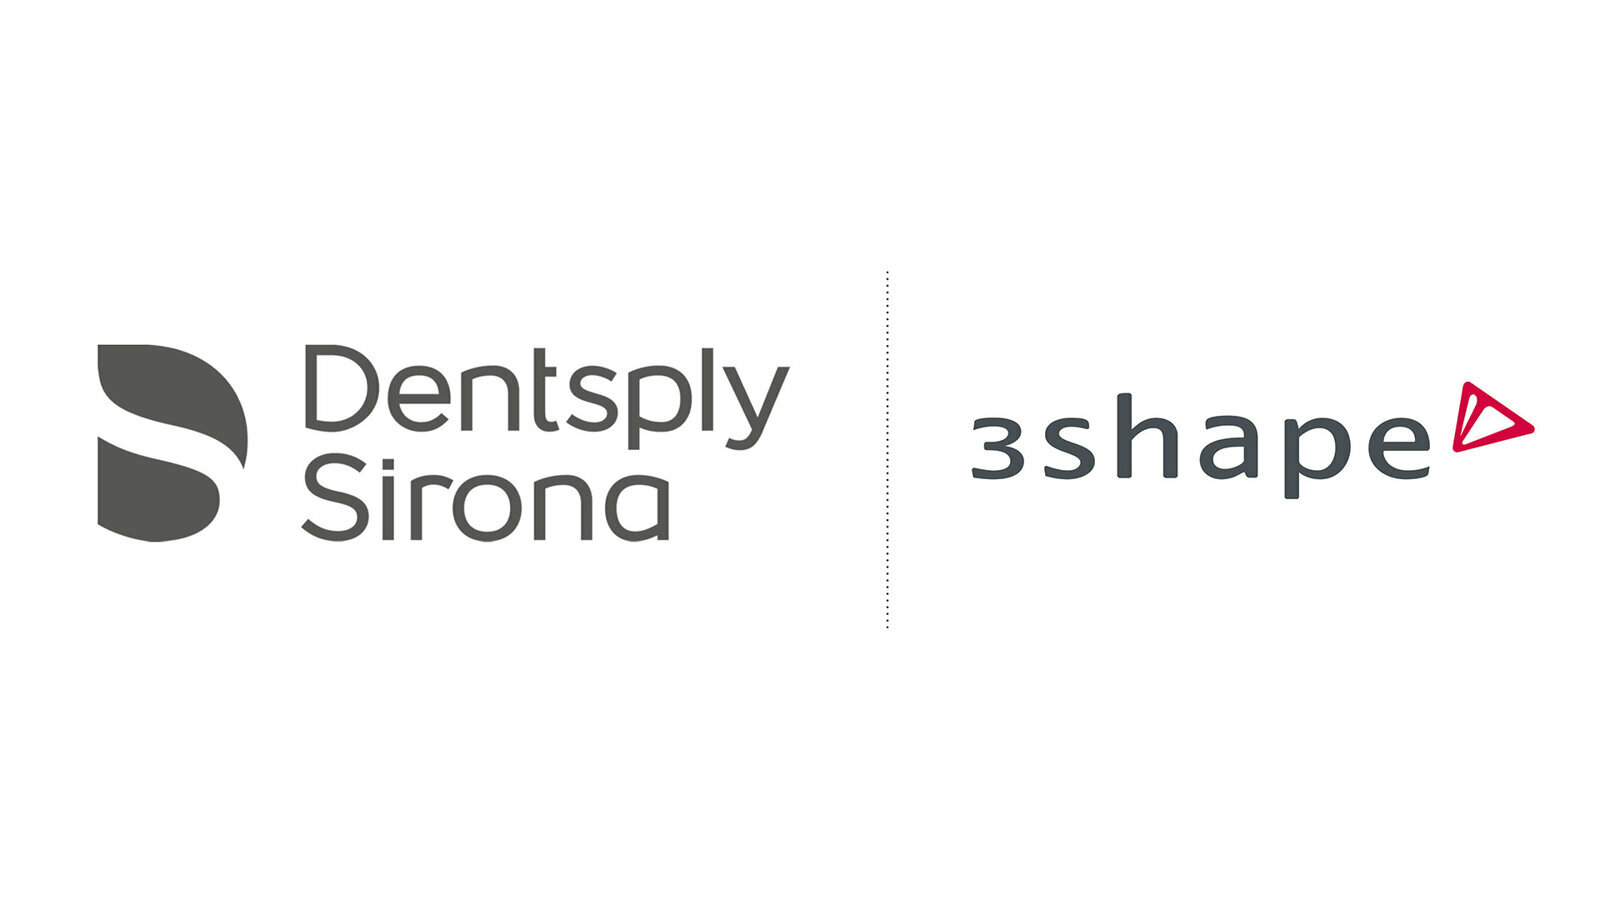 Dentsply Sirona and 3Shape expand their strategic partnership with seamless connectivity for dentists and dental labs
